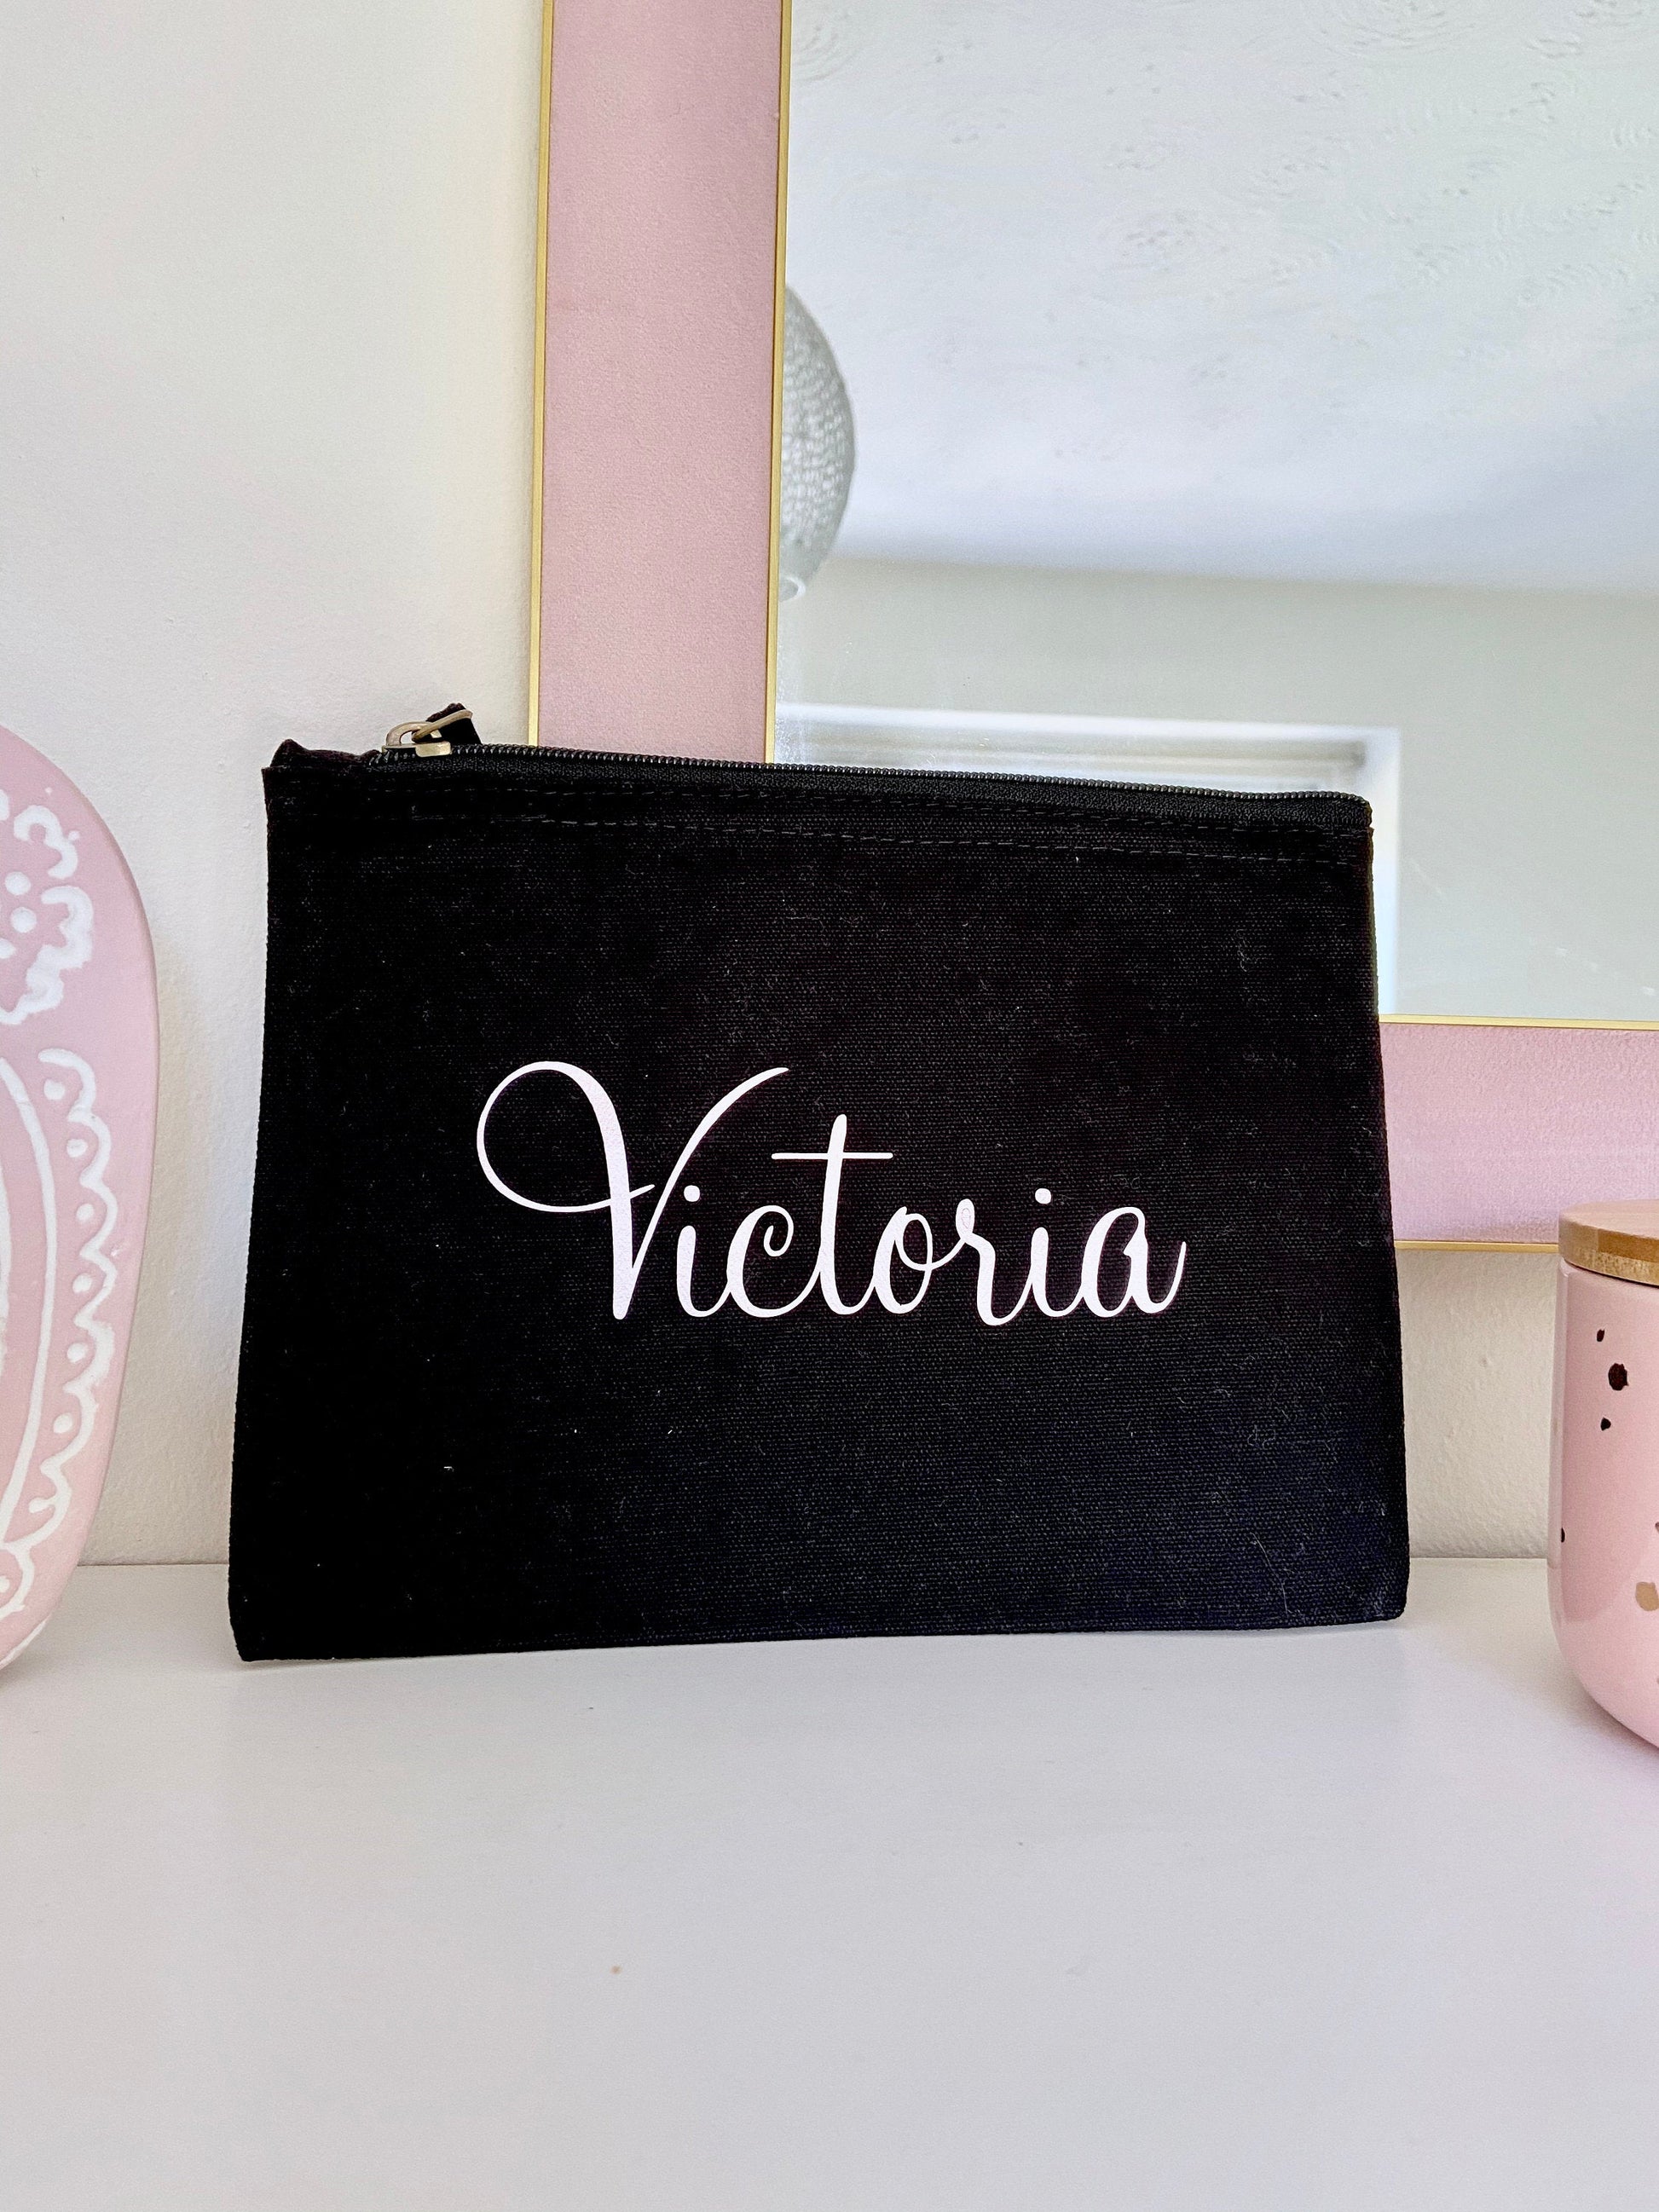 Personalised Grey Make Up Bag - Penny Rose Home and Gifts